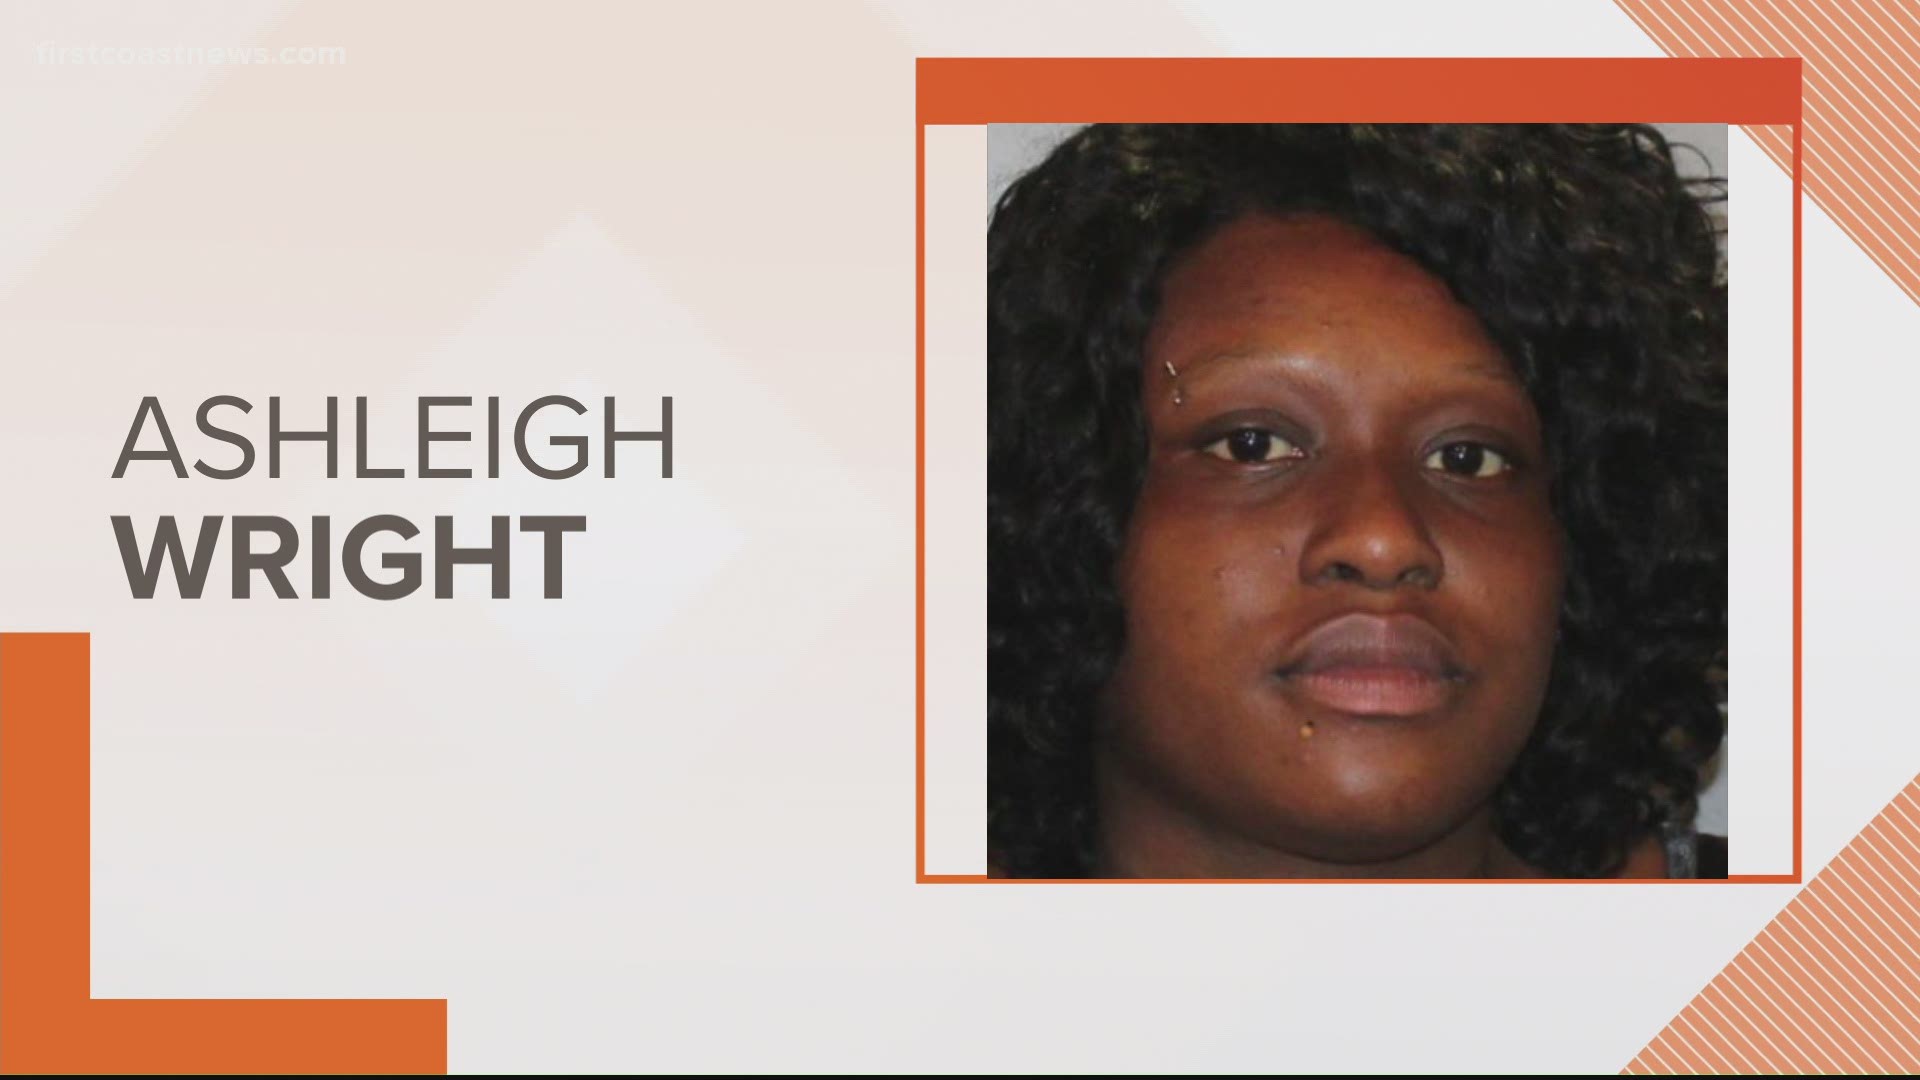 An arrest warrant has been obtained for Ashleigh Wright on a burglary charge, according to JSO.